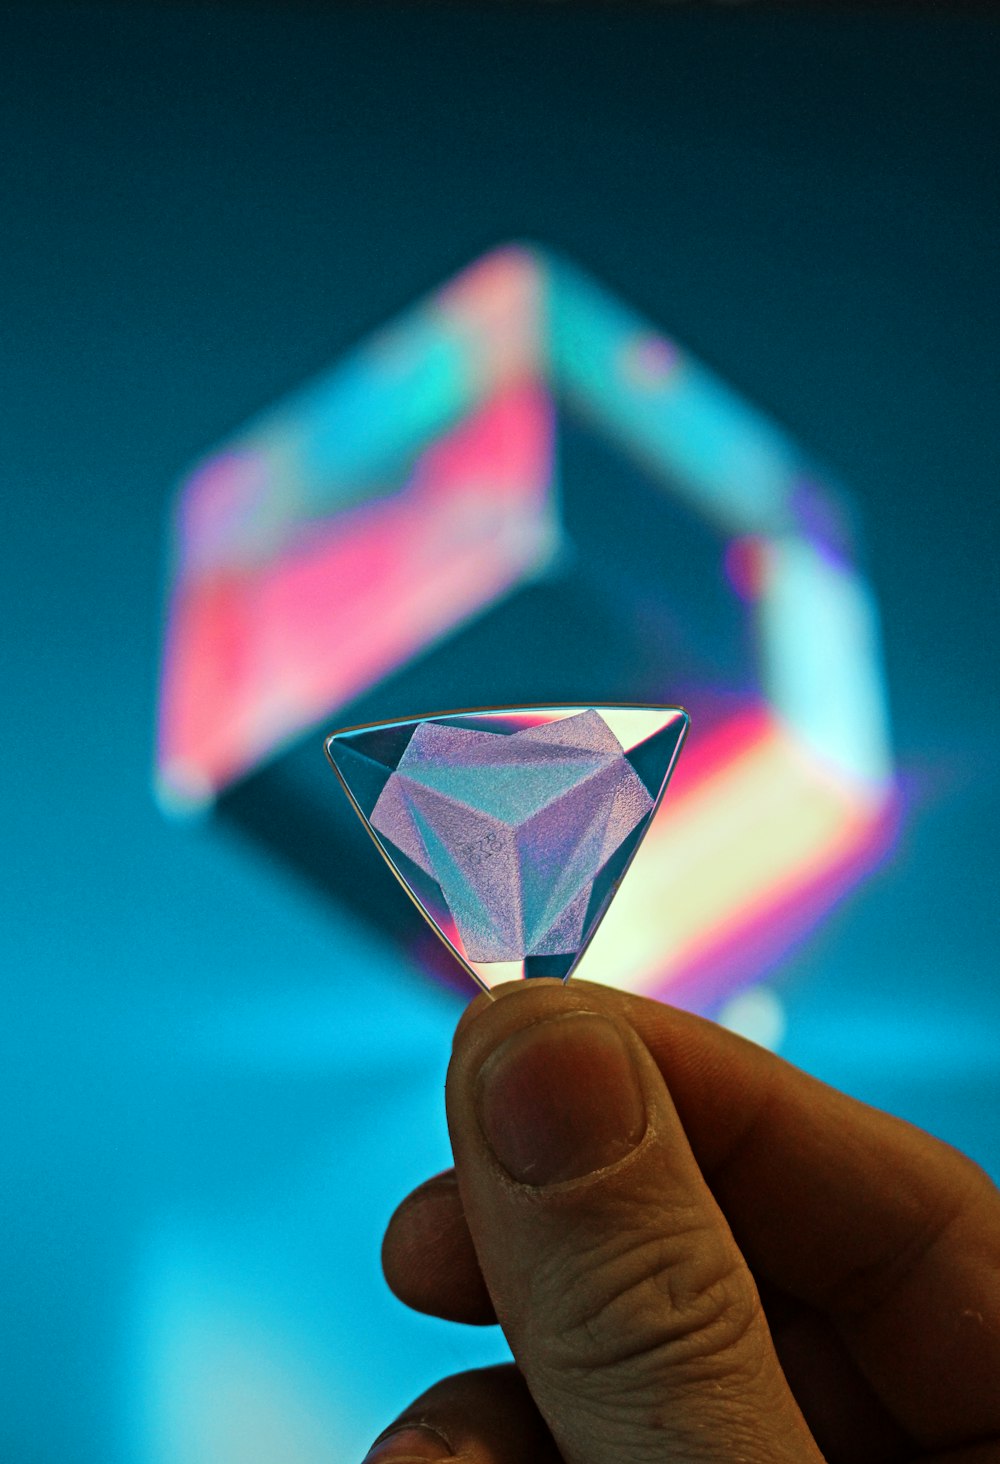 a person holding a small diamond in their hand